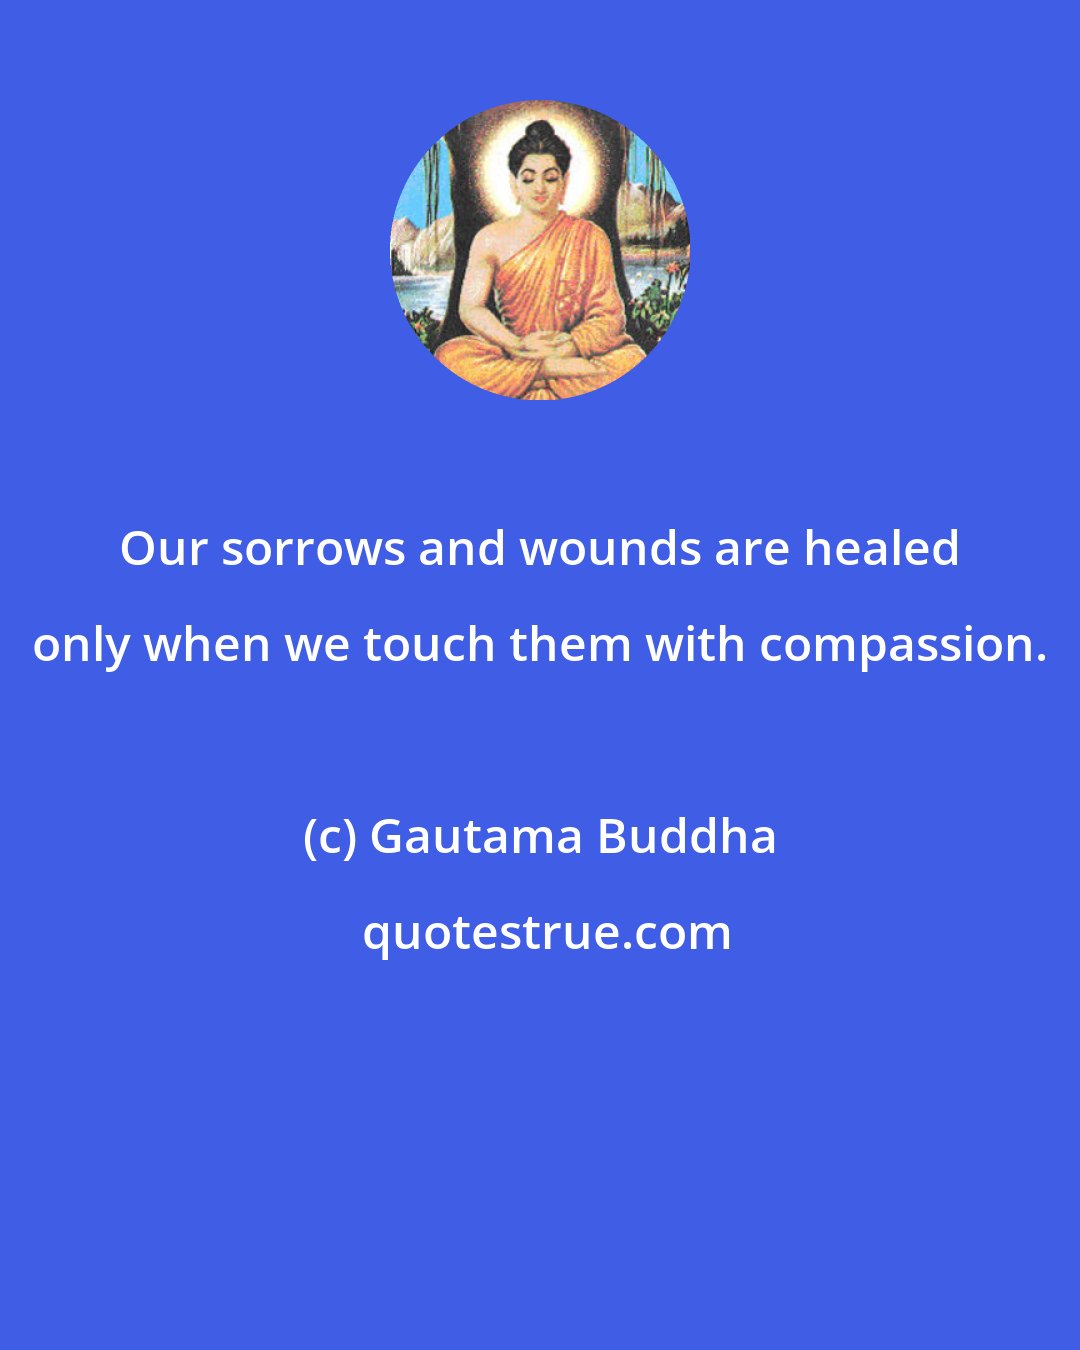 Gautama Buddha: Our sorrows and wounds are healed only when we touch them with compassion.